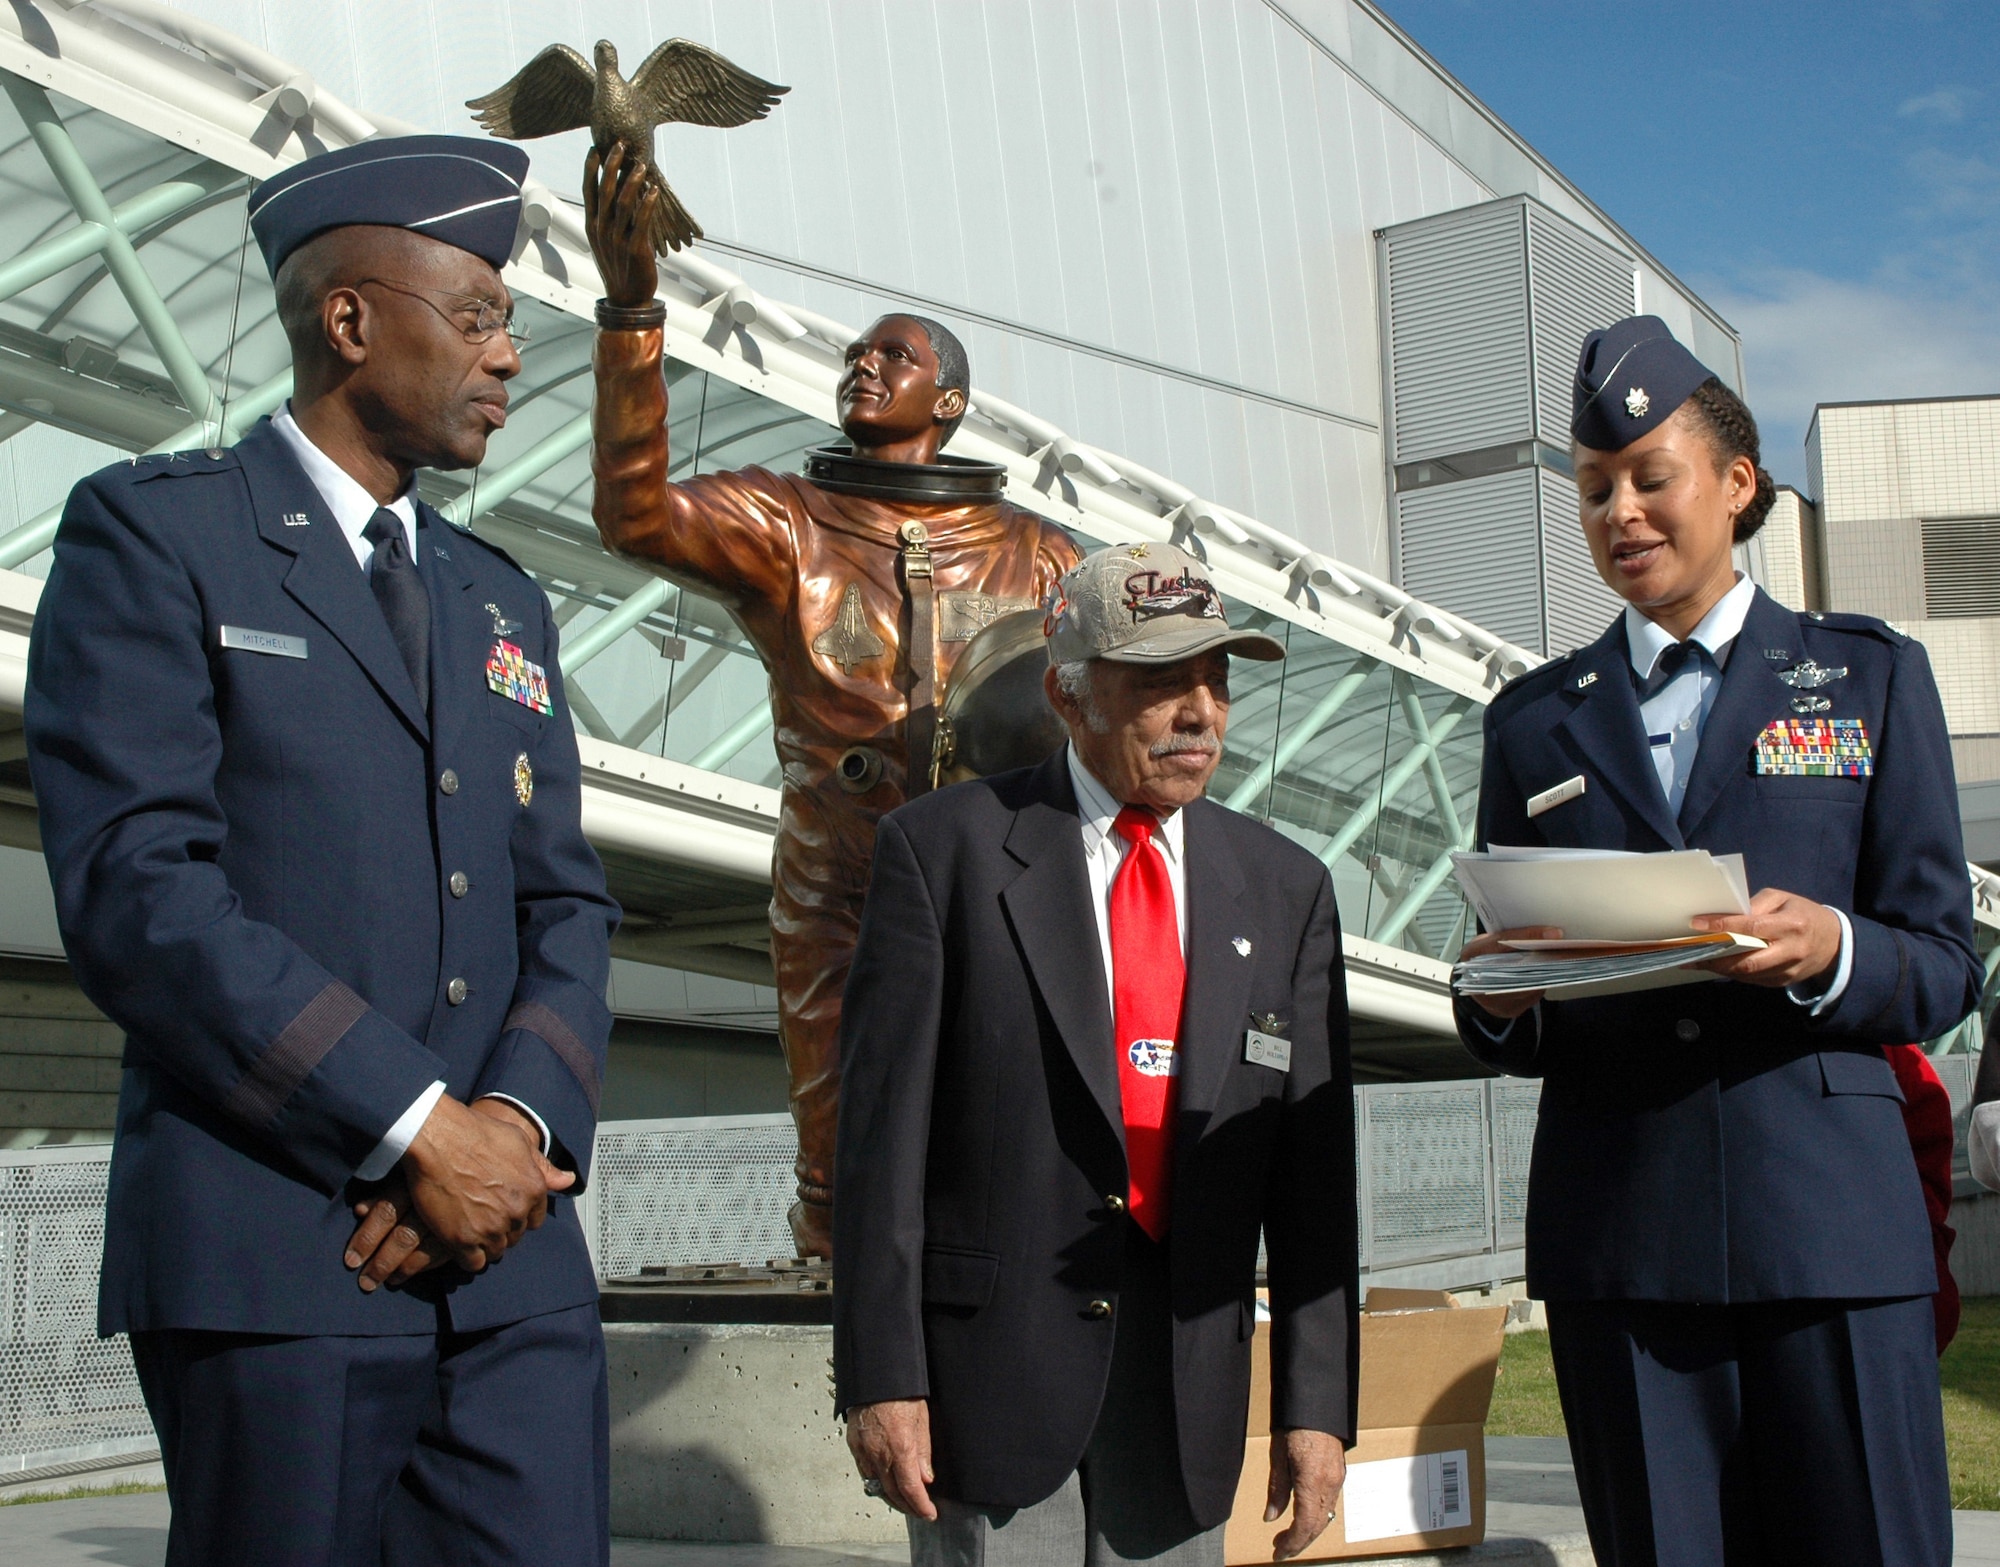 SEATTLE, Wash.- Maj. Gen. "Mitch" Mitchell, Deputy Inspector General of the Air Force (left), Tuskegee Airman Lt. Col. Bill Holloman (ret.), and Lt. Col. Kimberly Scott, 728th Airlift Squadron pilot, Joint Base Lewis-McChord, prepare to present certificates to students as part of the Michael Anderson Memorial Scholarship event at Seattle's Museum of Flight on Feb. 6. The scholarship, named in honor of the fallen Air Force pilot and astronaut, gives students from all over Washington state the opportunity to learn about the aerospace industry. (U.S. Air Force photo/Staff Sgt. Elizabeth Moody)